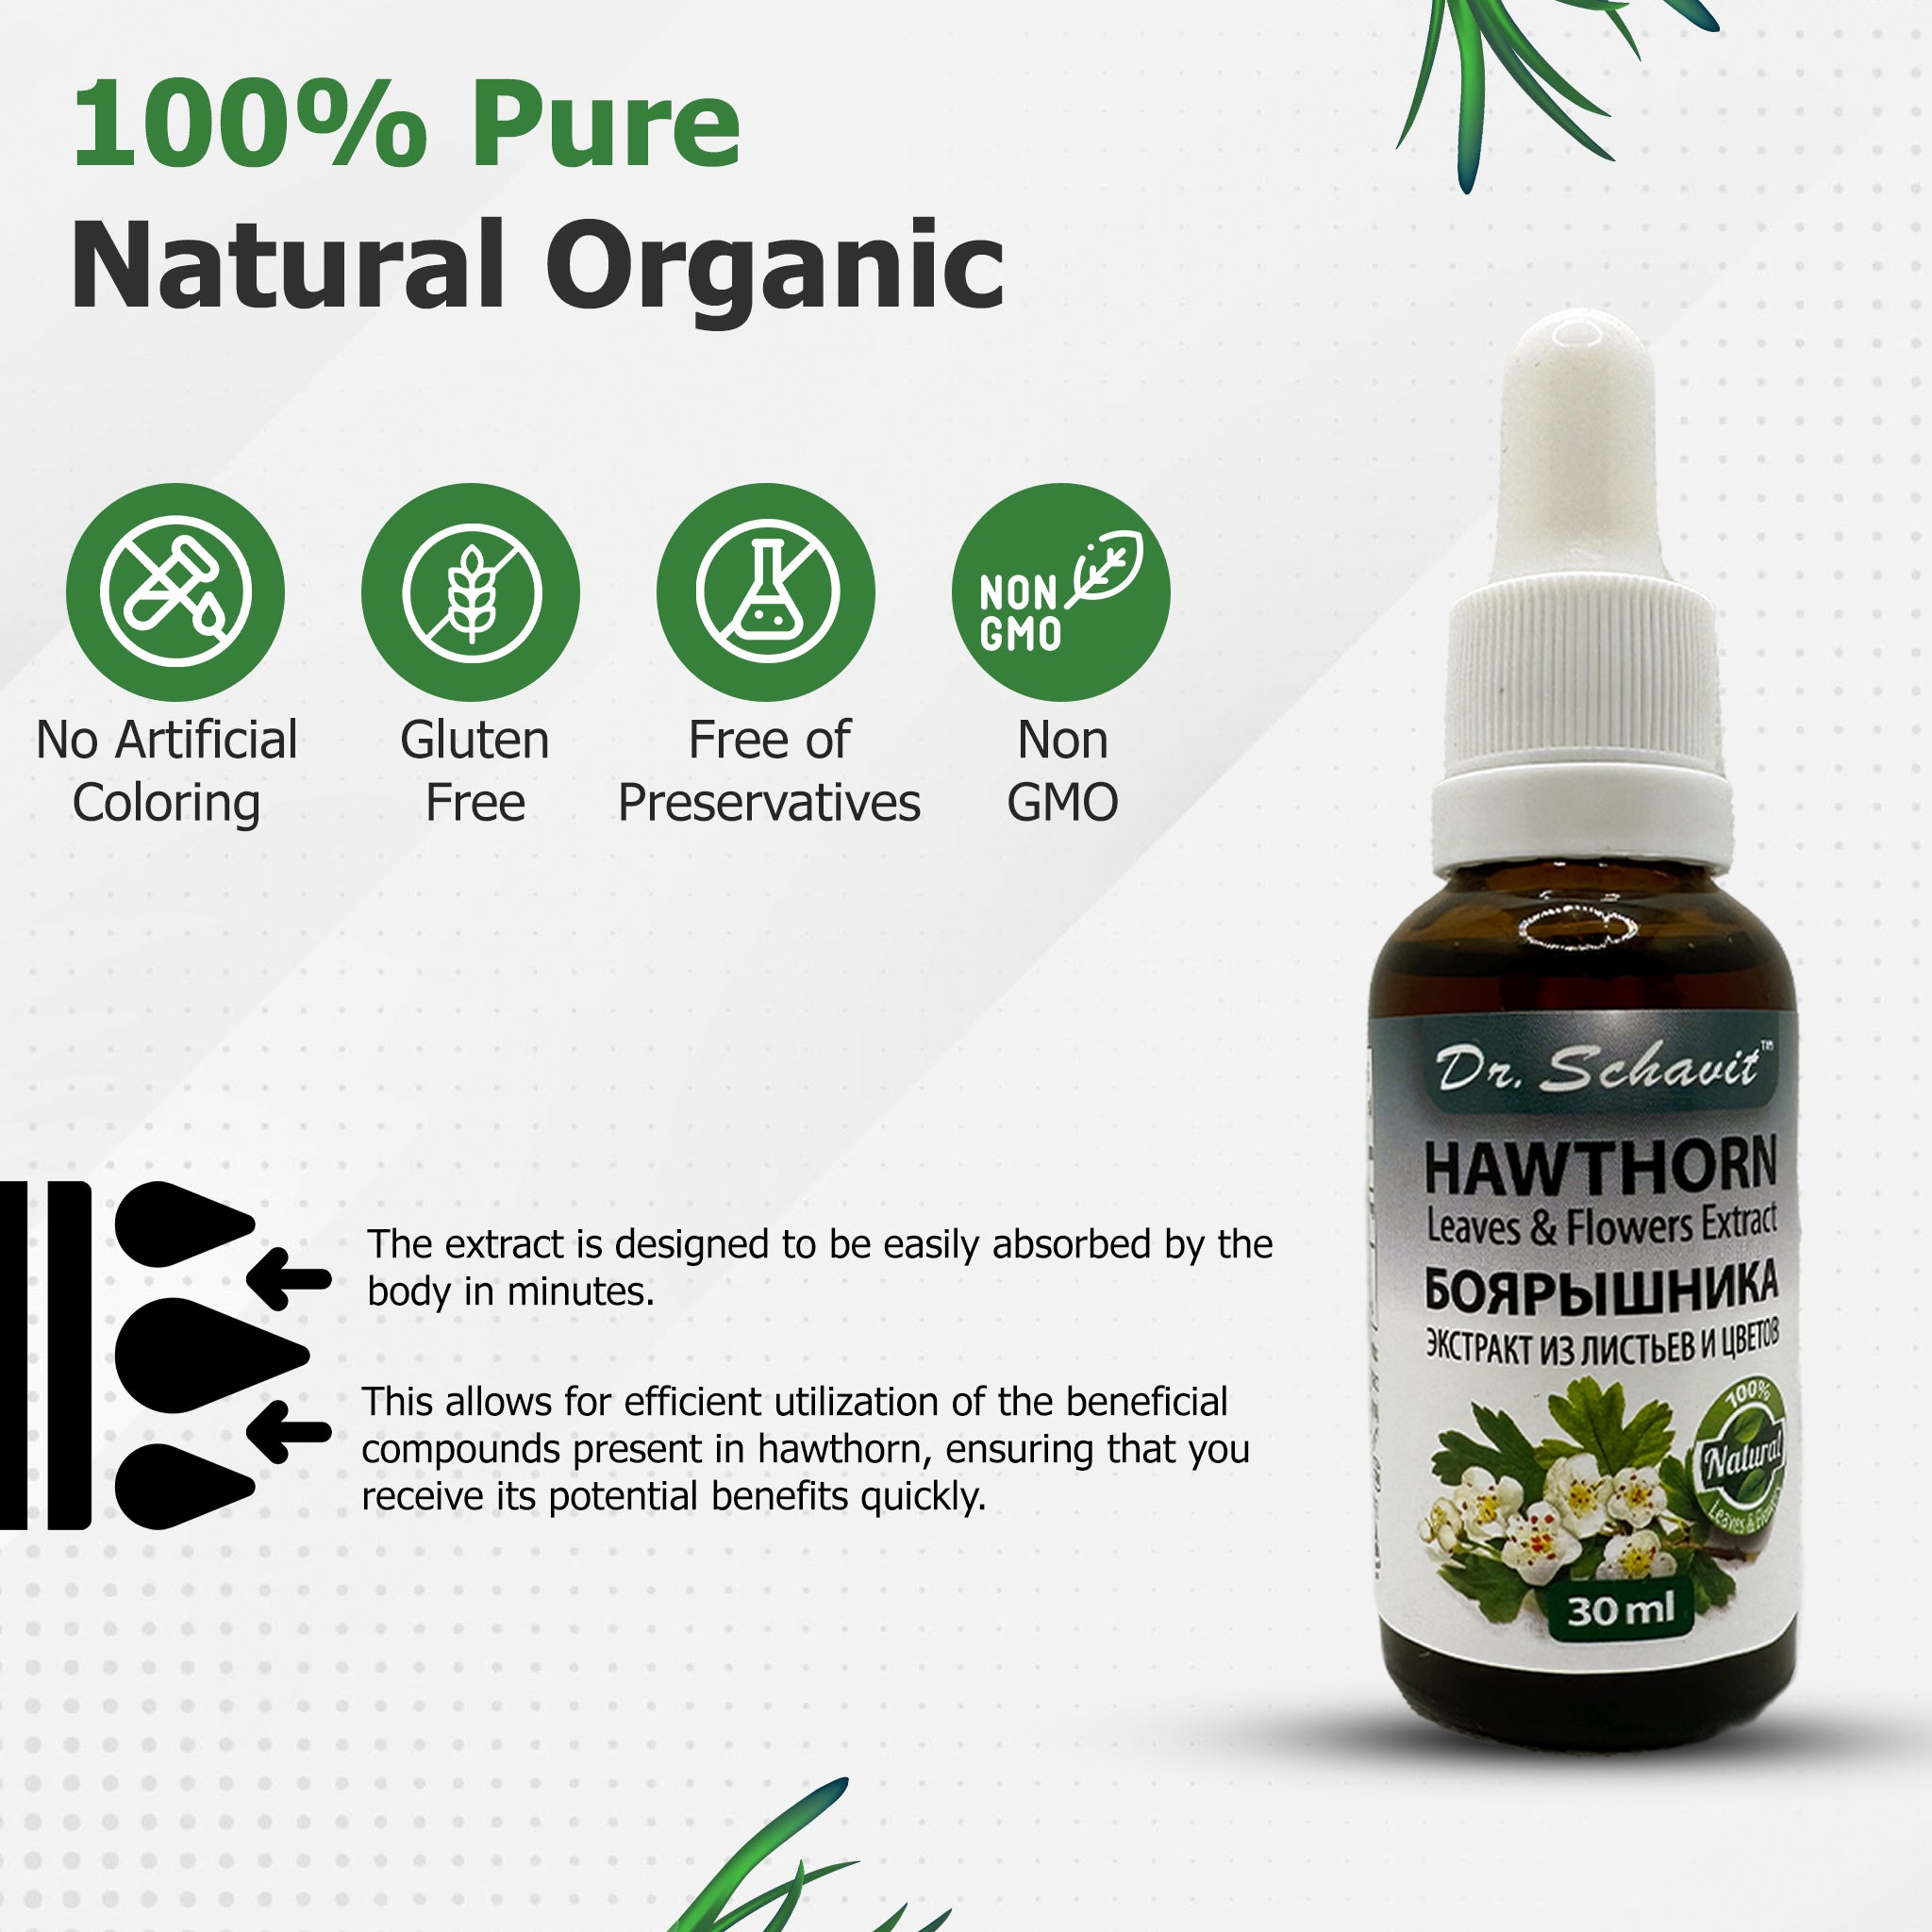 Dr. Schavit 100% Natural Hawthorn Leaves and Flowers Extract. Gluten-Free , Vegan. Promotes Circulation Function | Helps Maintain Cholesterol Level 30ml/1Fl.Oz